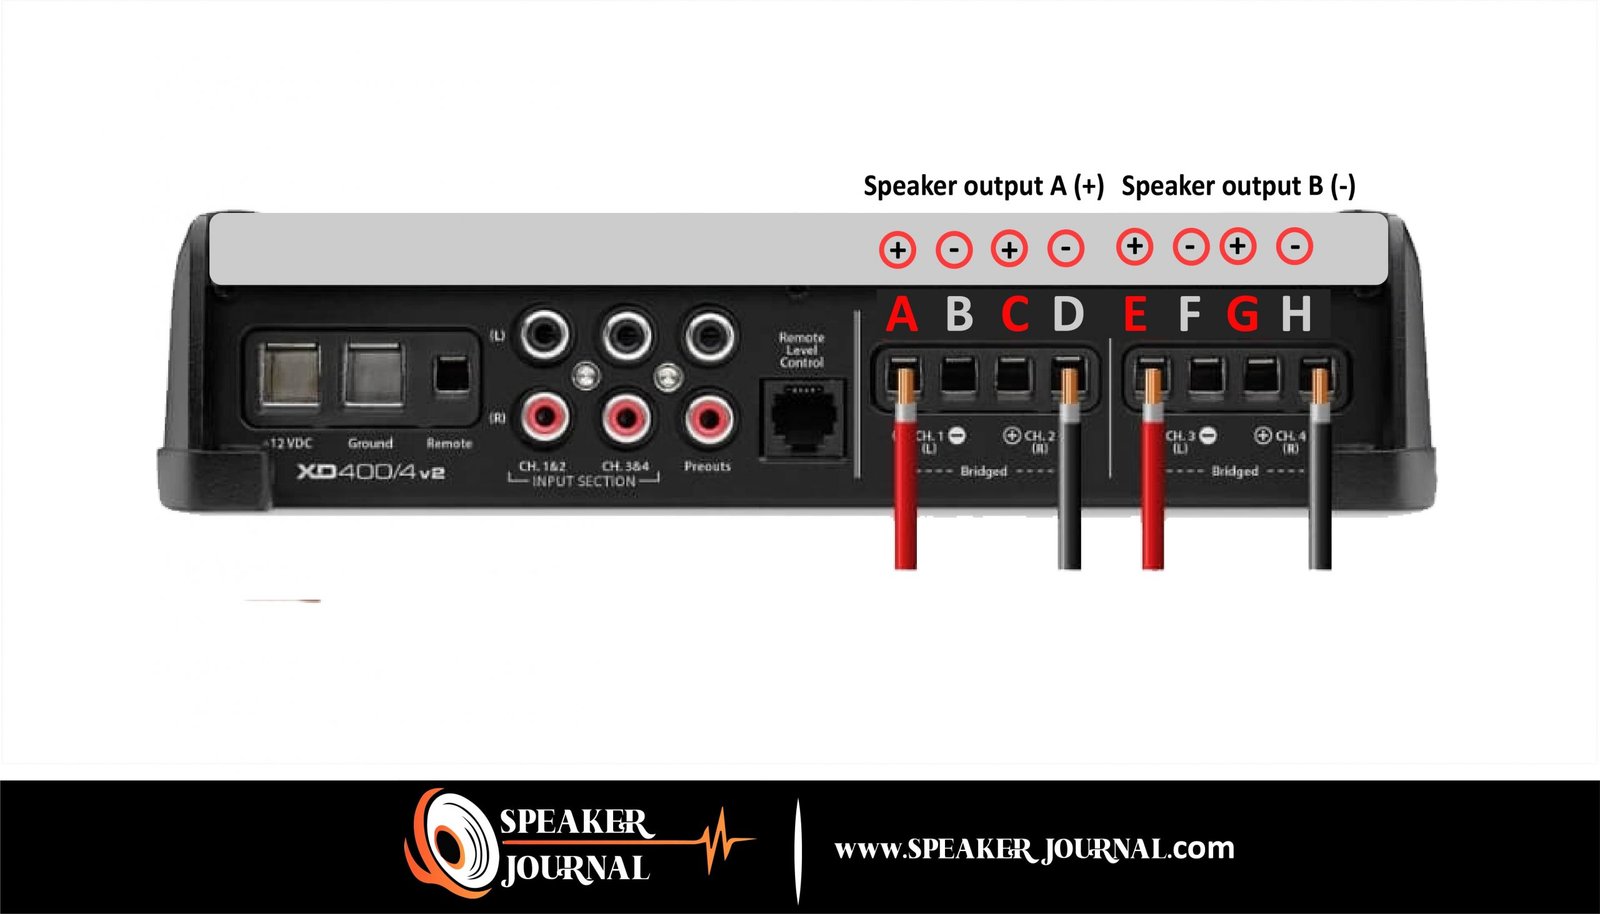 How To Bridge An Amp by speakerjournal.com